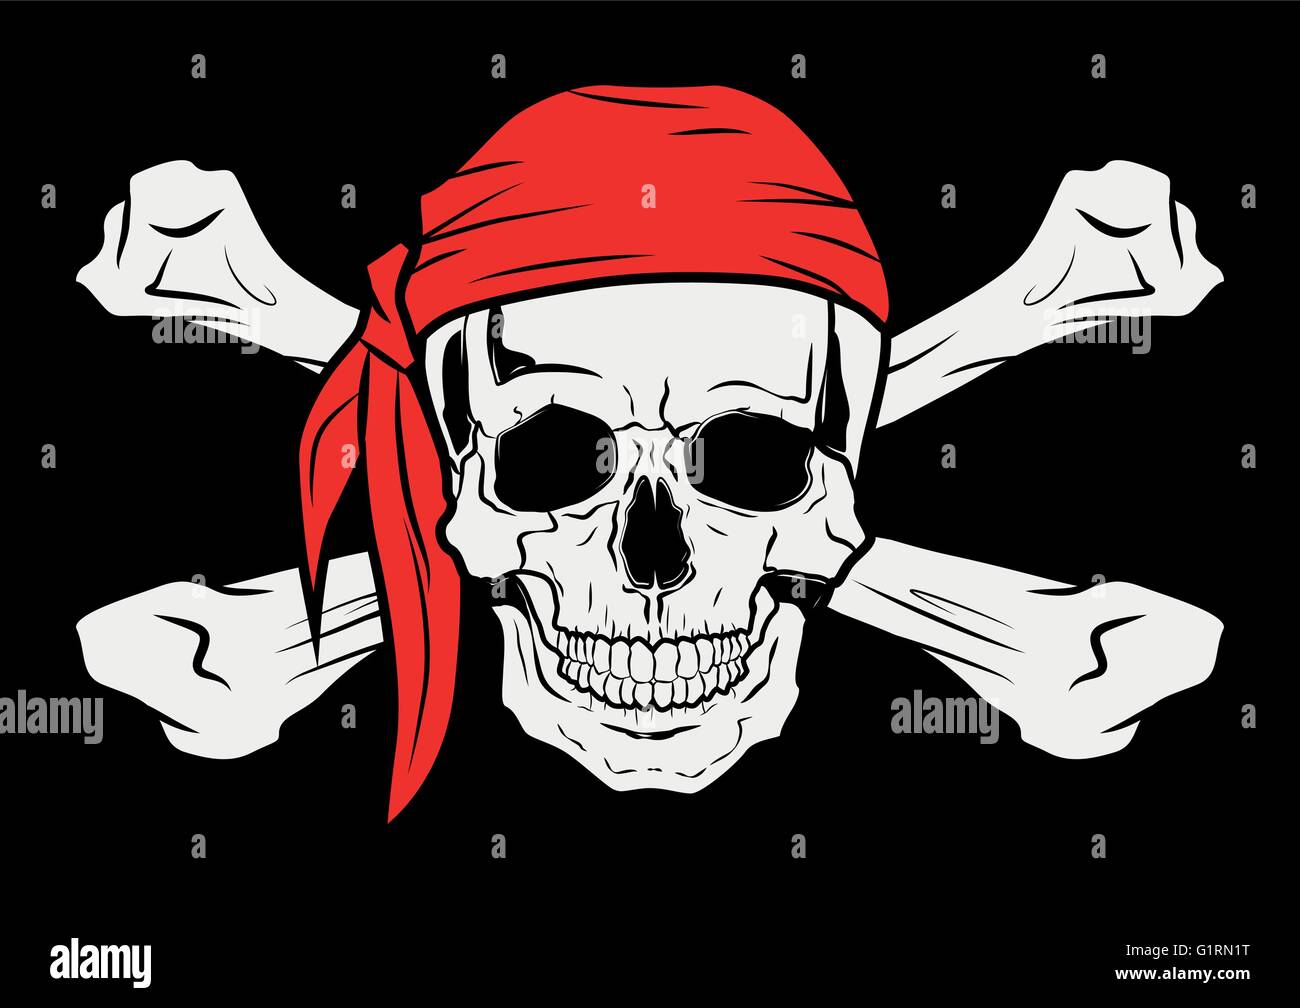 Illustration Vector Graphic Skull Pirate for the creative use in graphic design Stock Vector